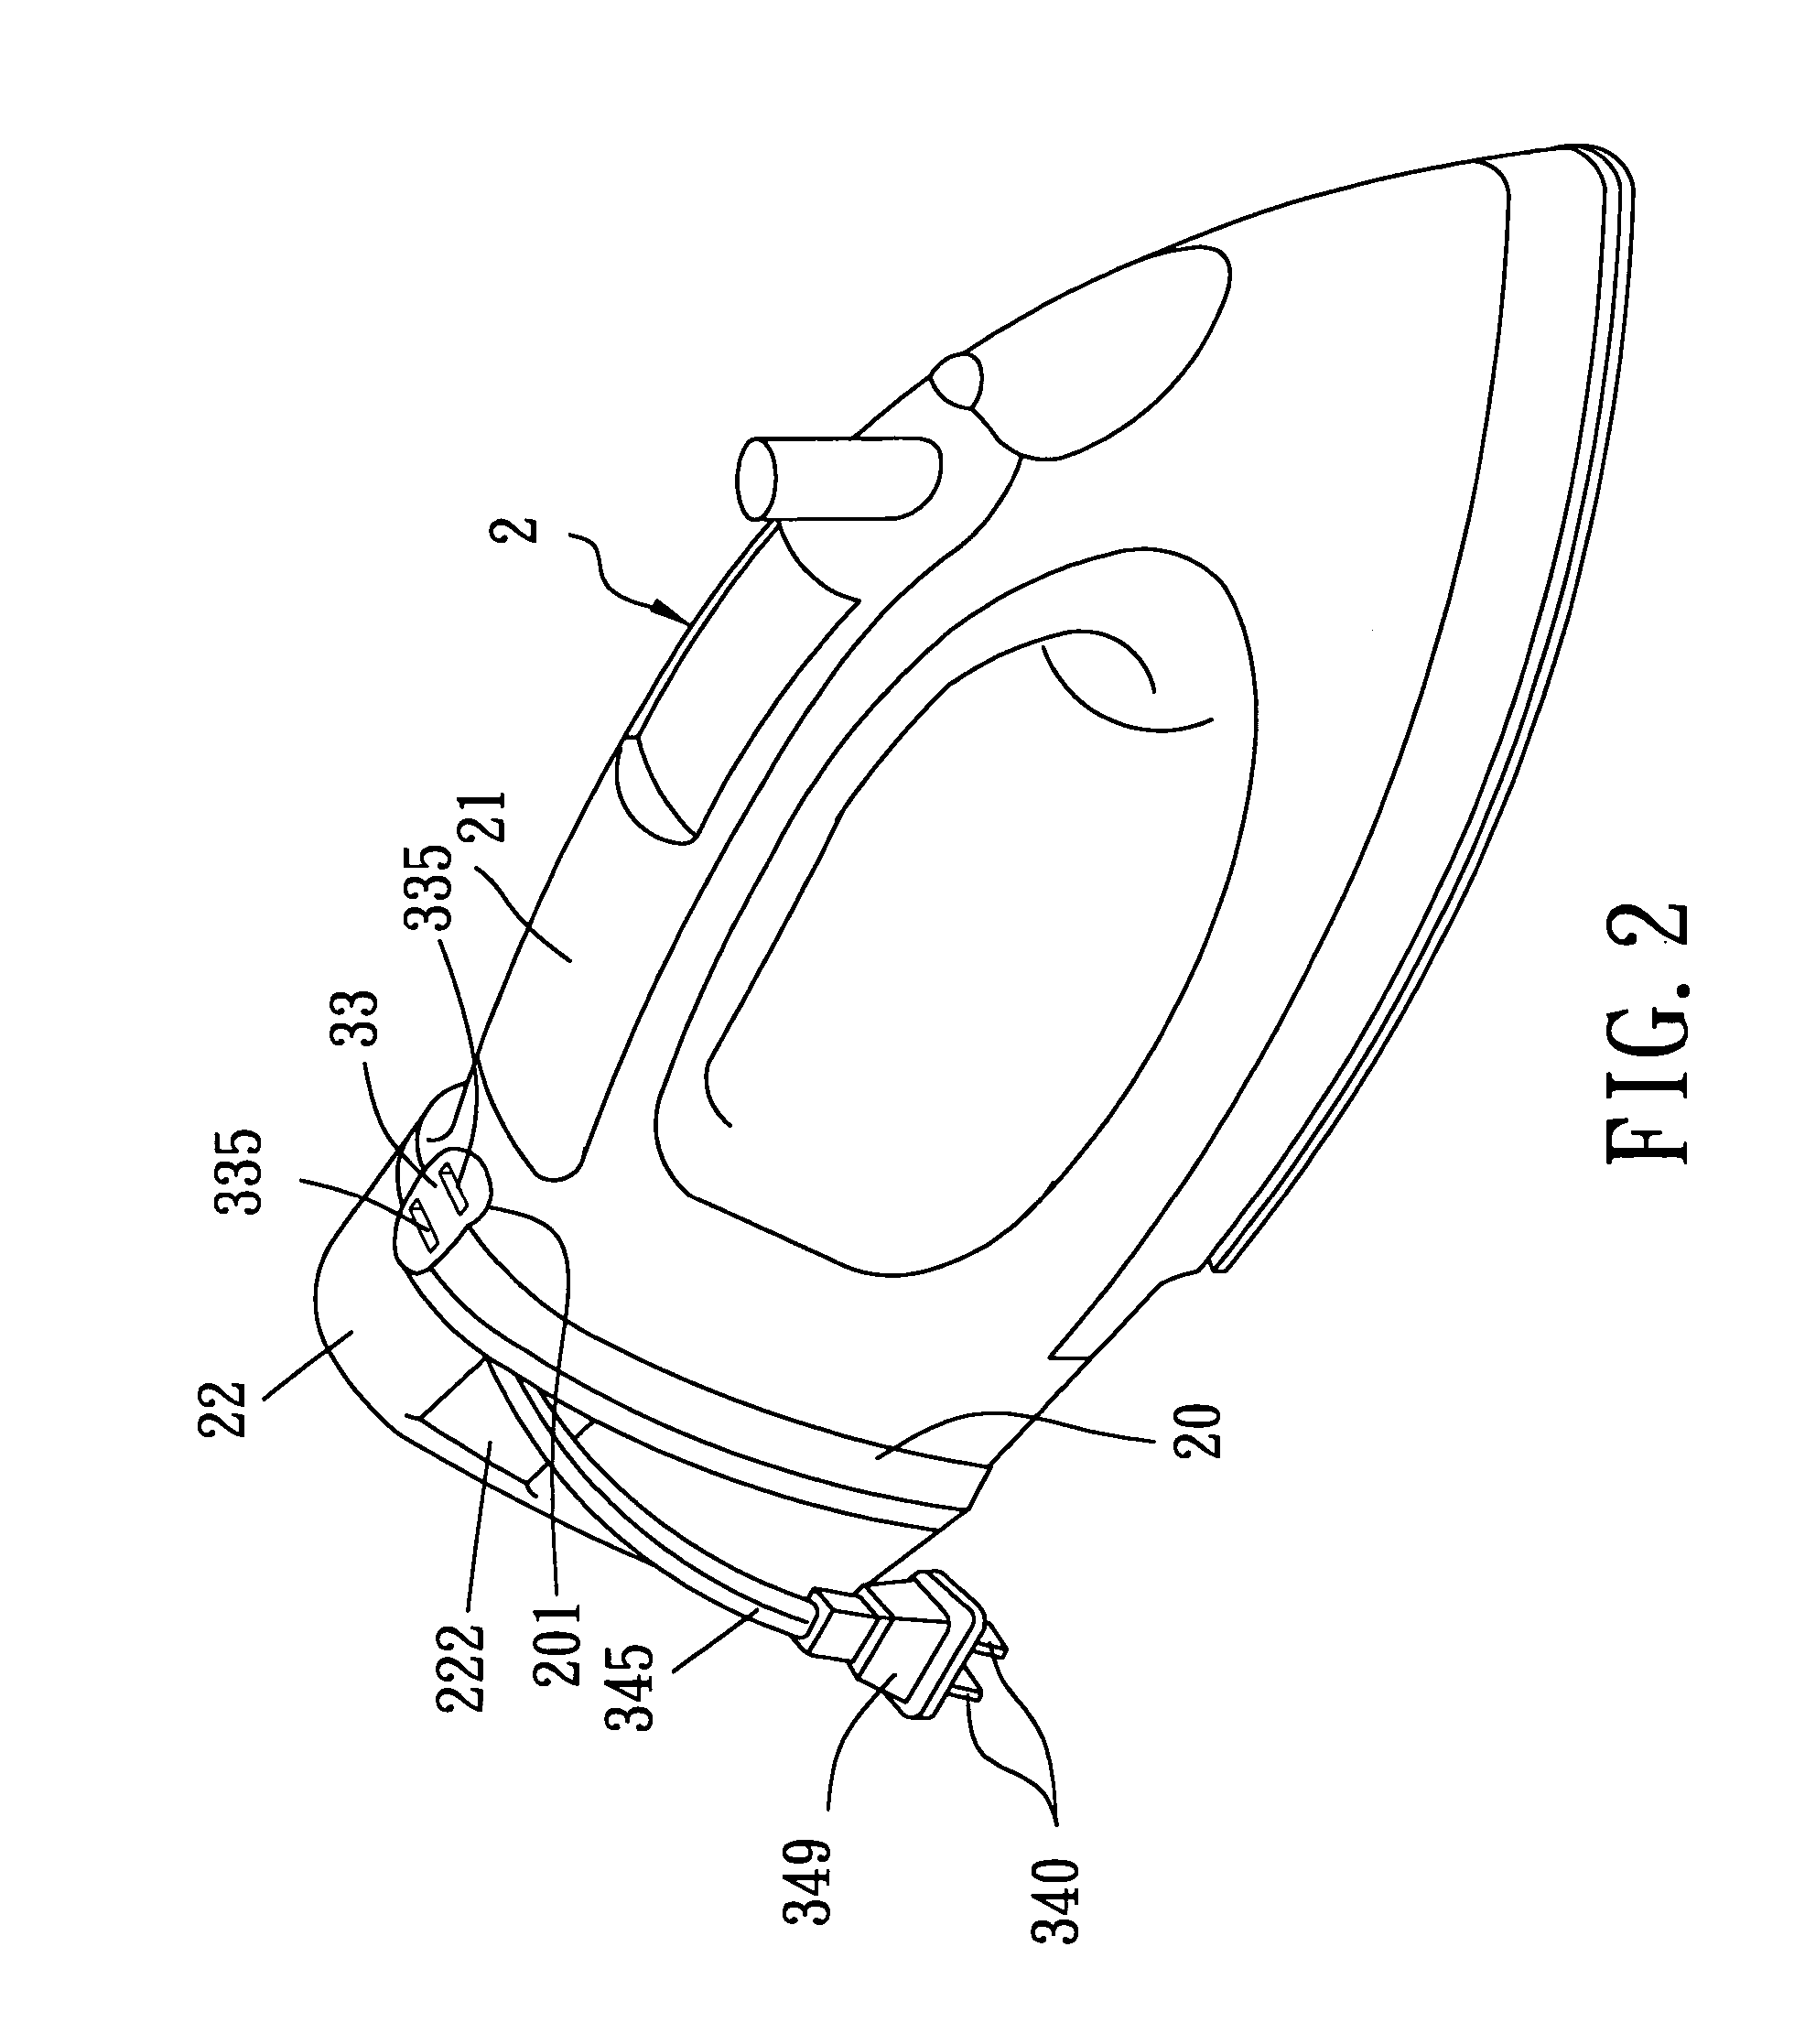 Electrical appliance having a wire winding device